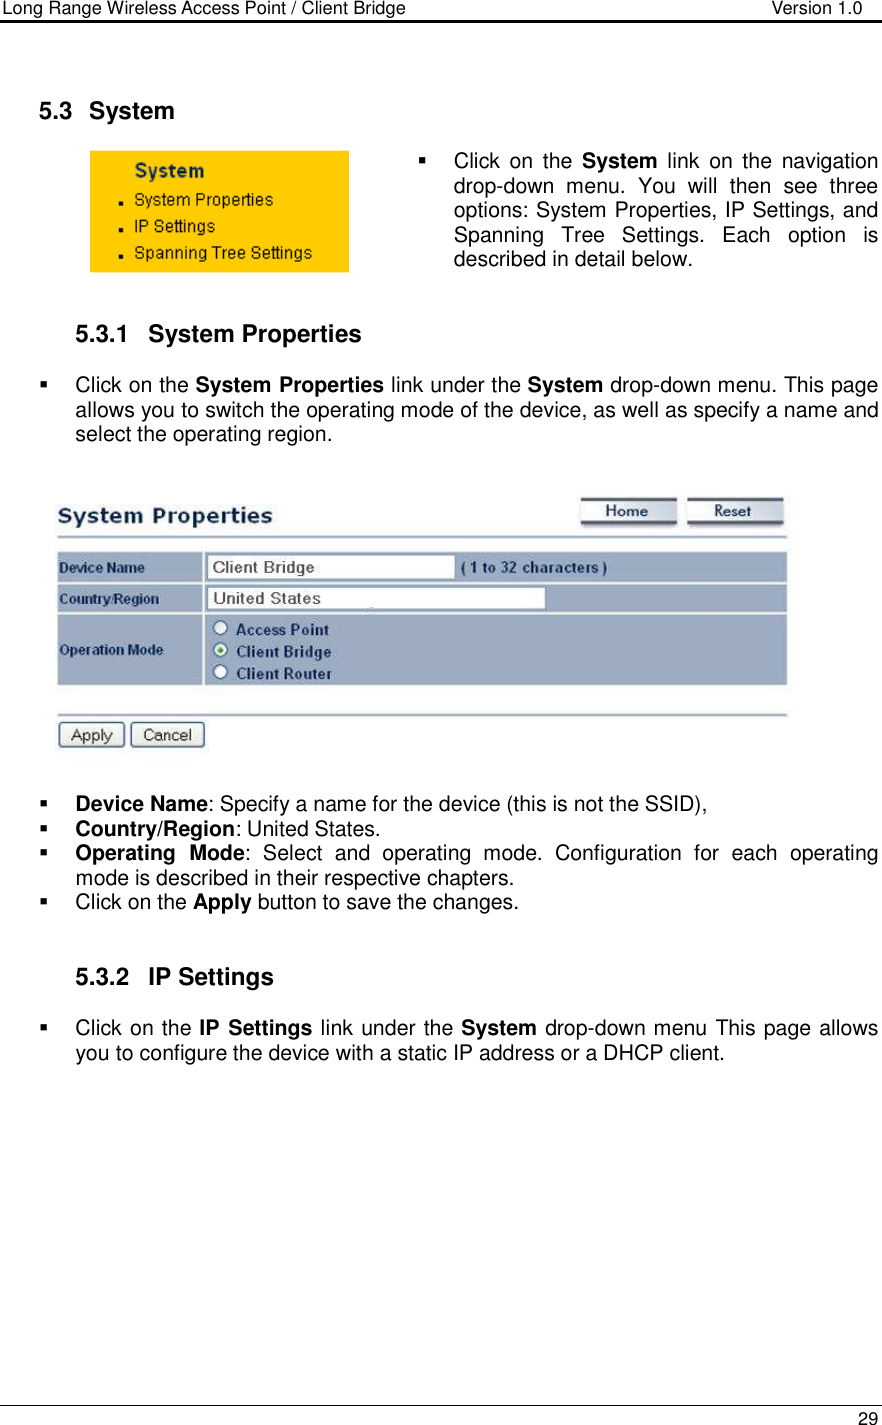 Long Range Wireless Access Point / Client Bridge                                   Version 1.0    29    5.3   System    Click  on  the  System  link  on  the  navigation drop-down  menu.  You  will  then  see  three options: System Properties, IP Settings, and Spanning  Tree  Settings.  Each  option  is described in detail below.    5.3.1  System Properties    Click on the System Properties link under the System drop-down menu. This page allows you to switch the operating mode of the device, as well as specify a name and select the operating region.      Device Name: Specify a name for the device (this is not the SSID),  Country/Region: United States.  Operating  Mode:  Select  and  operating  mode.  Configuration  for  each  operating mode is described in their respective chapters.    Click on the Apply button to save the changes.    5.3.2  IP Settings   Click on the IP Settings link under the System drop-down menu This page allows you to configure the device with a static IP address or a DHCP client.    